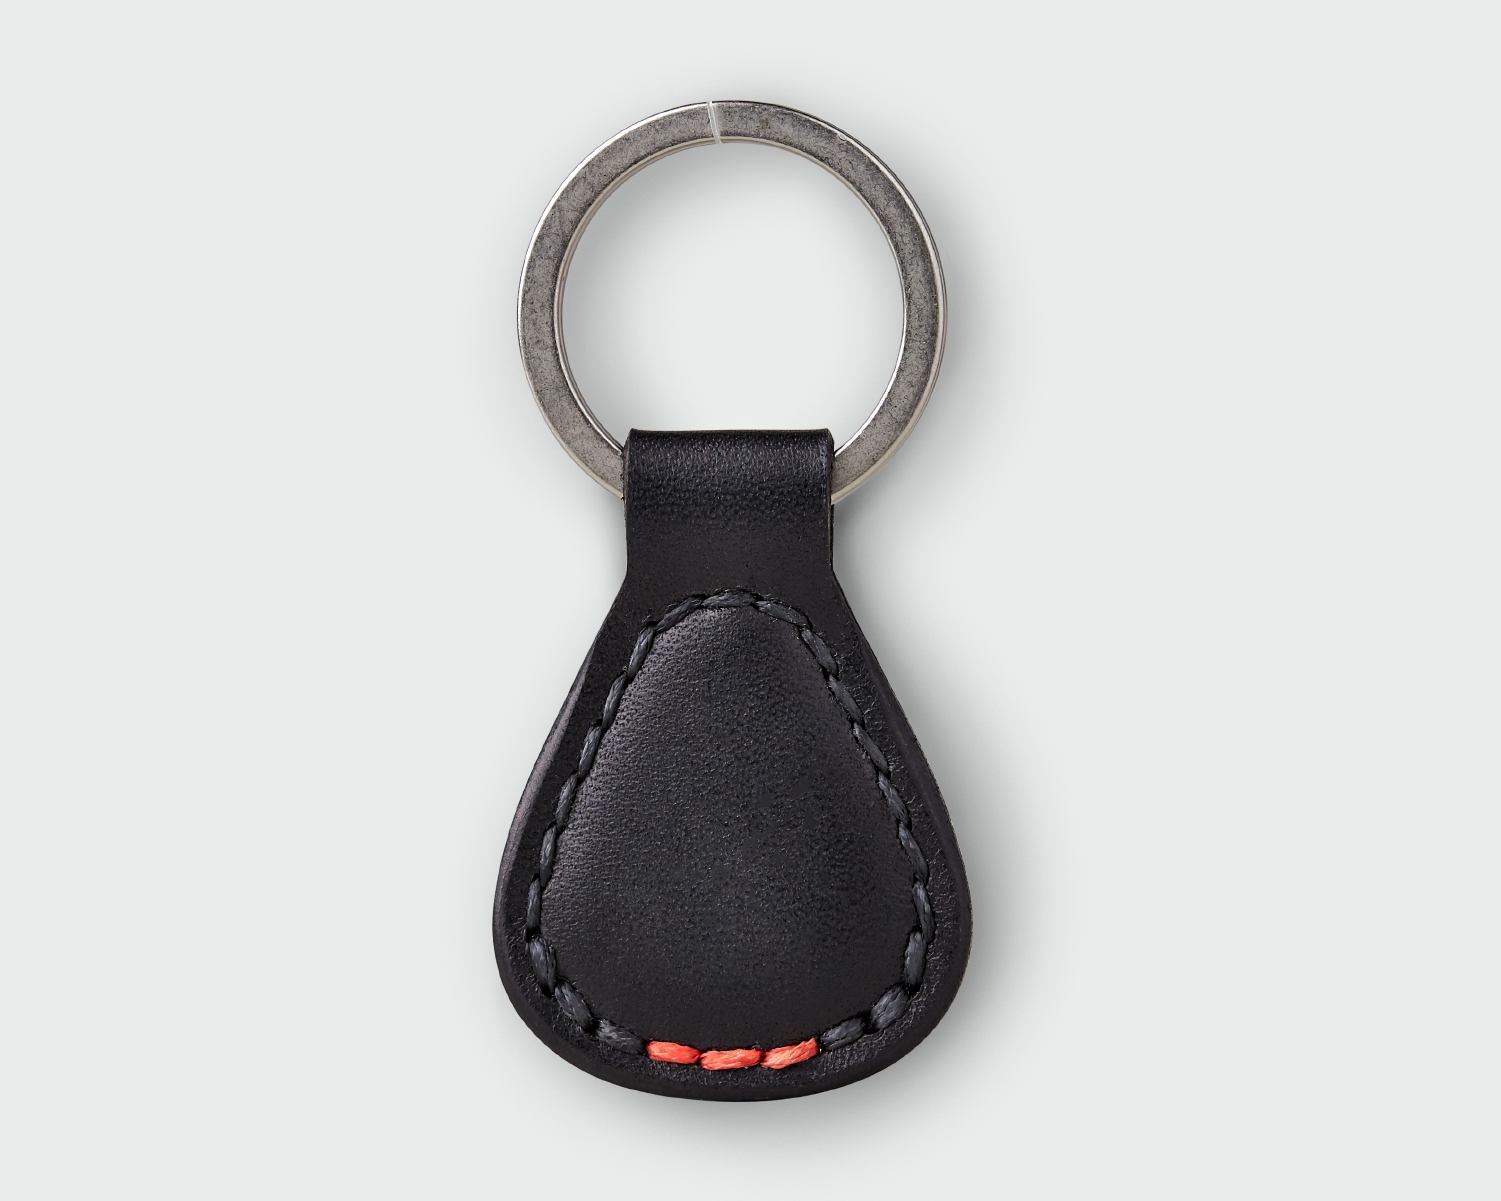 Made in the USA - Black Leather Key Fob with Basketweave Protector